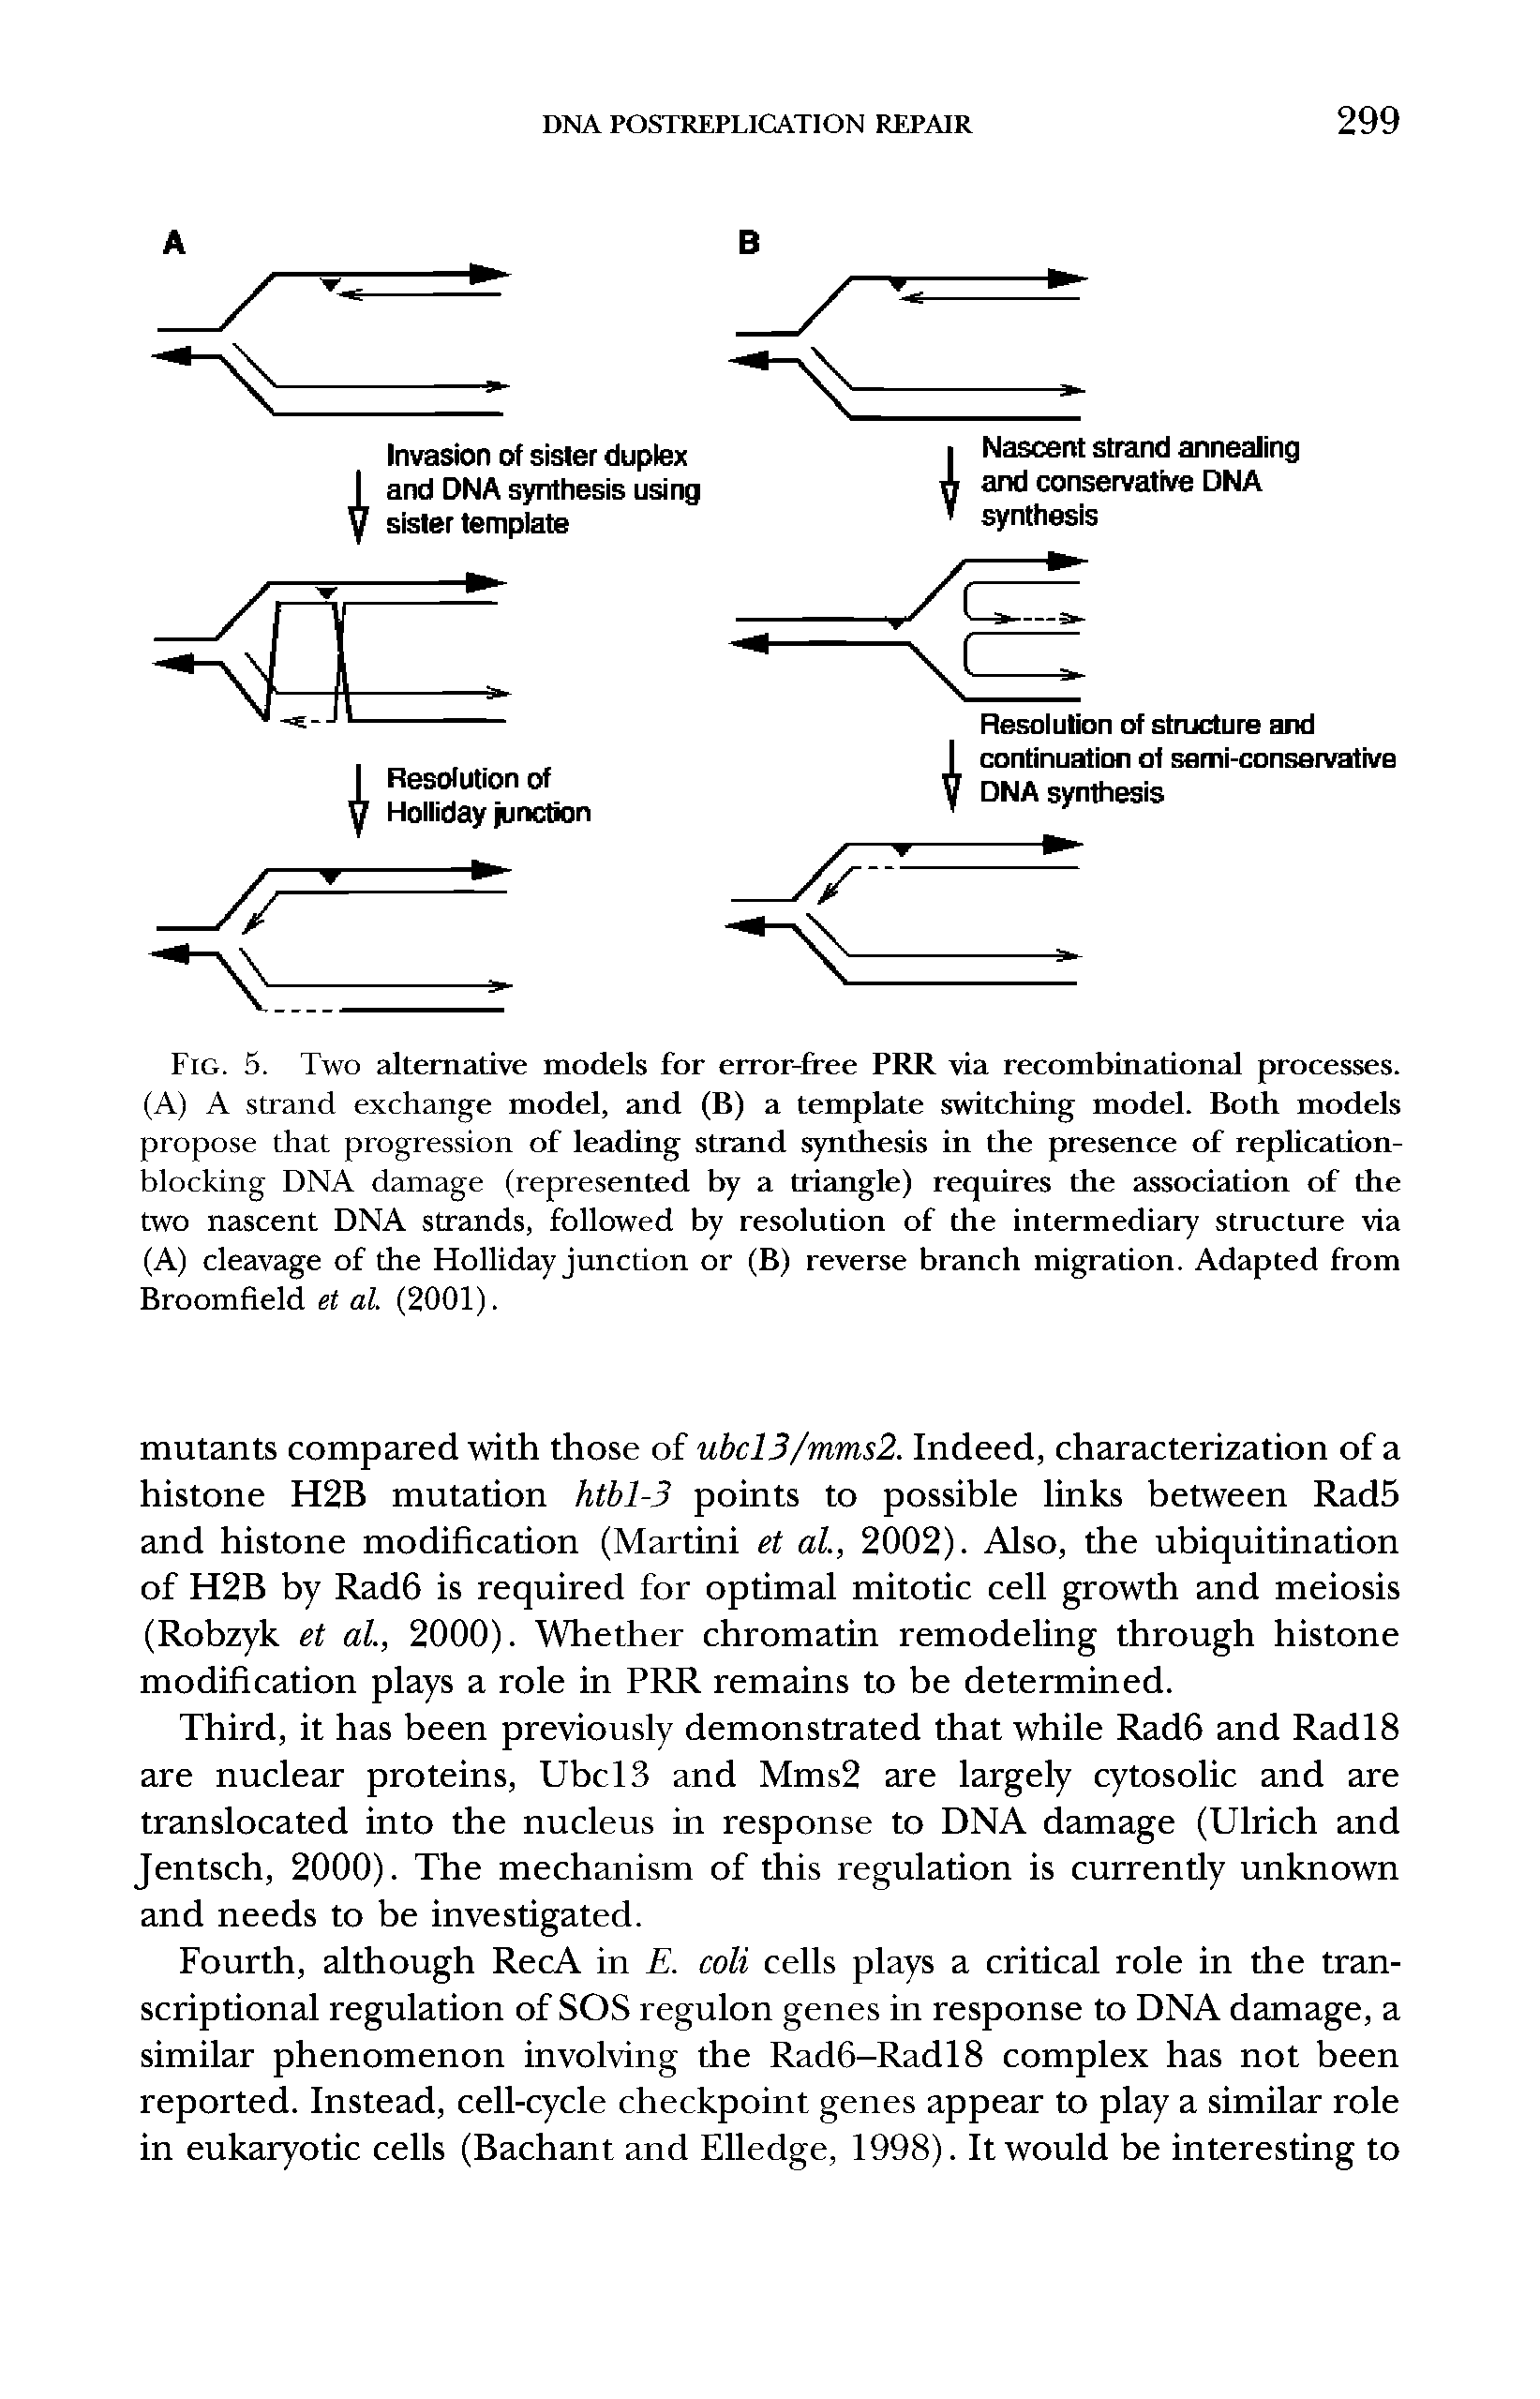 Fig. 5. Two alternative models for error-free PRR via recombinational processes. (A) A strand exchange model, and (B) a template switching model. Both models propose that progression of leading strand synthesis in the presence of replicationblocking DNA damage (represented by a triangle) requires the association of the two nascent DNA strands, followed by resolution of the intermediary structure via (A) cleavage of the Holliday junction or (B) reverse branch migration. Adapted from Broomfield et al. (2001).